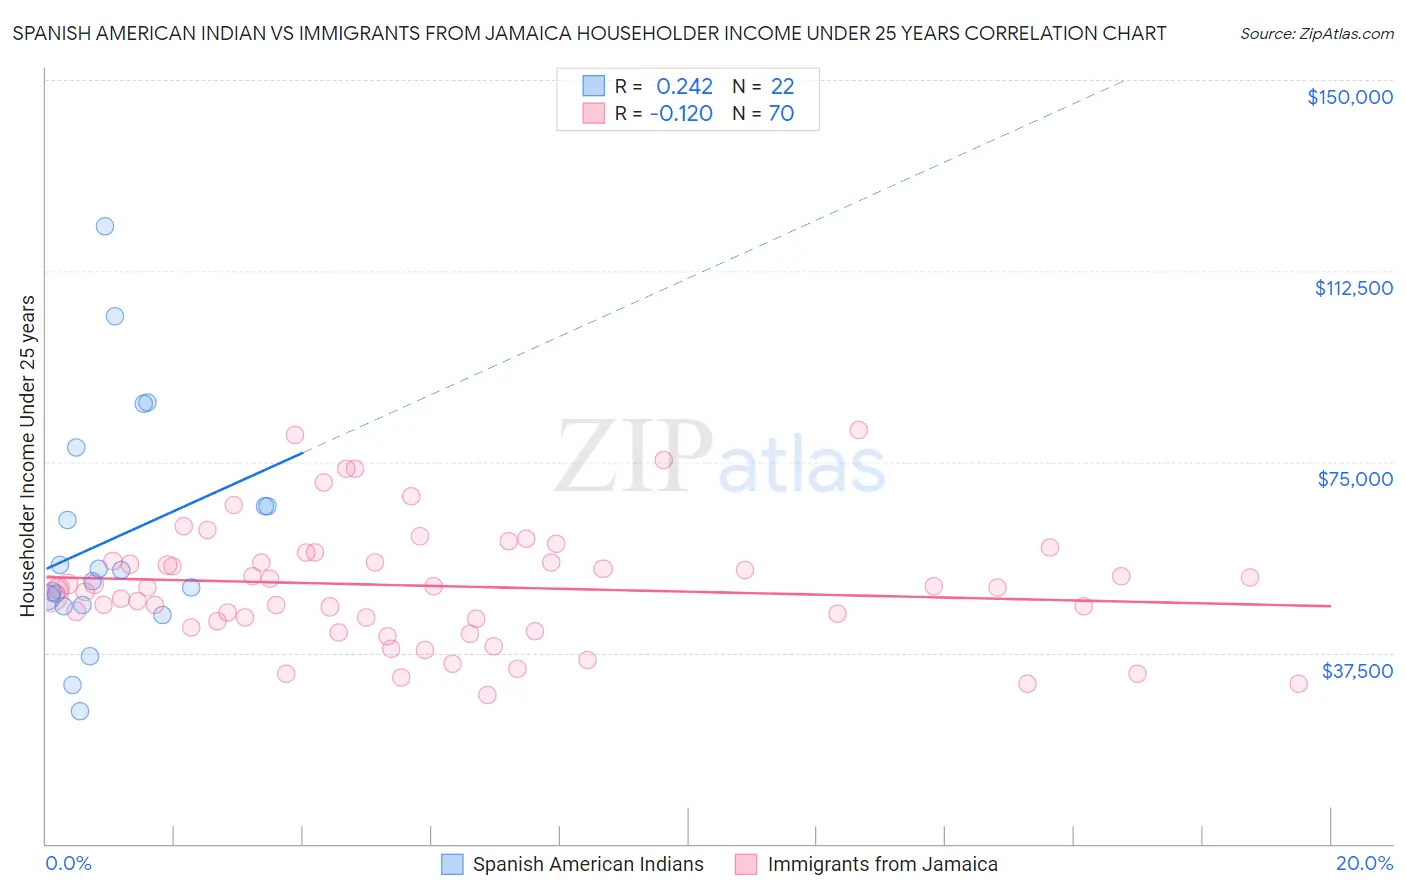 Spanish American Indian vs Immigrants from Jamaica Householder Income Under 25 years